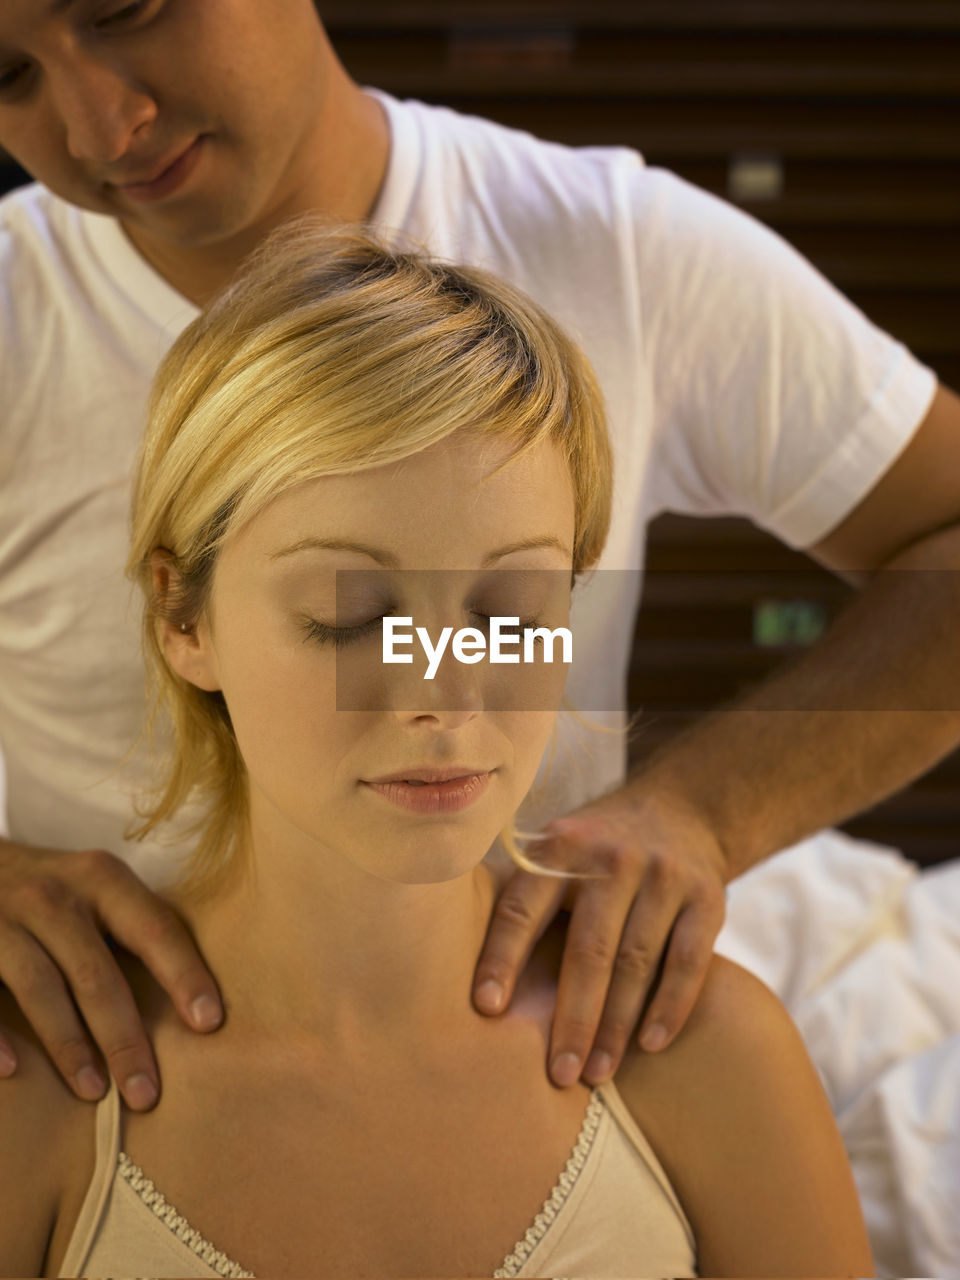 Boyfriend giving massage to girlfriend on bed at home